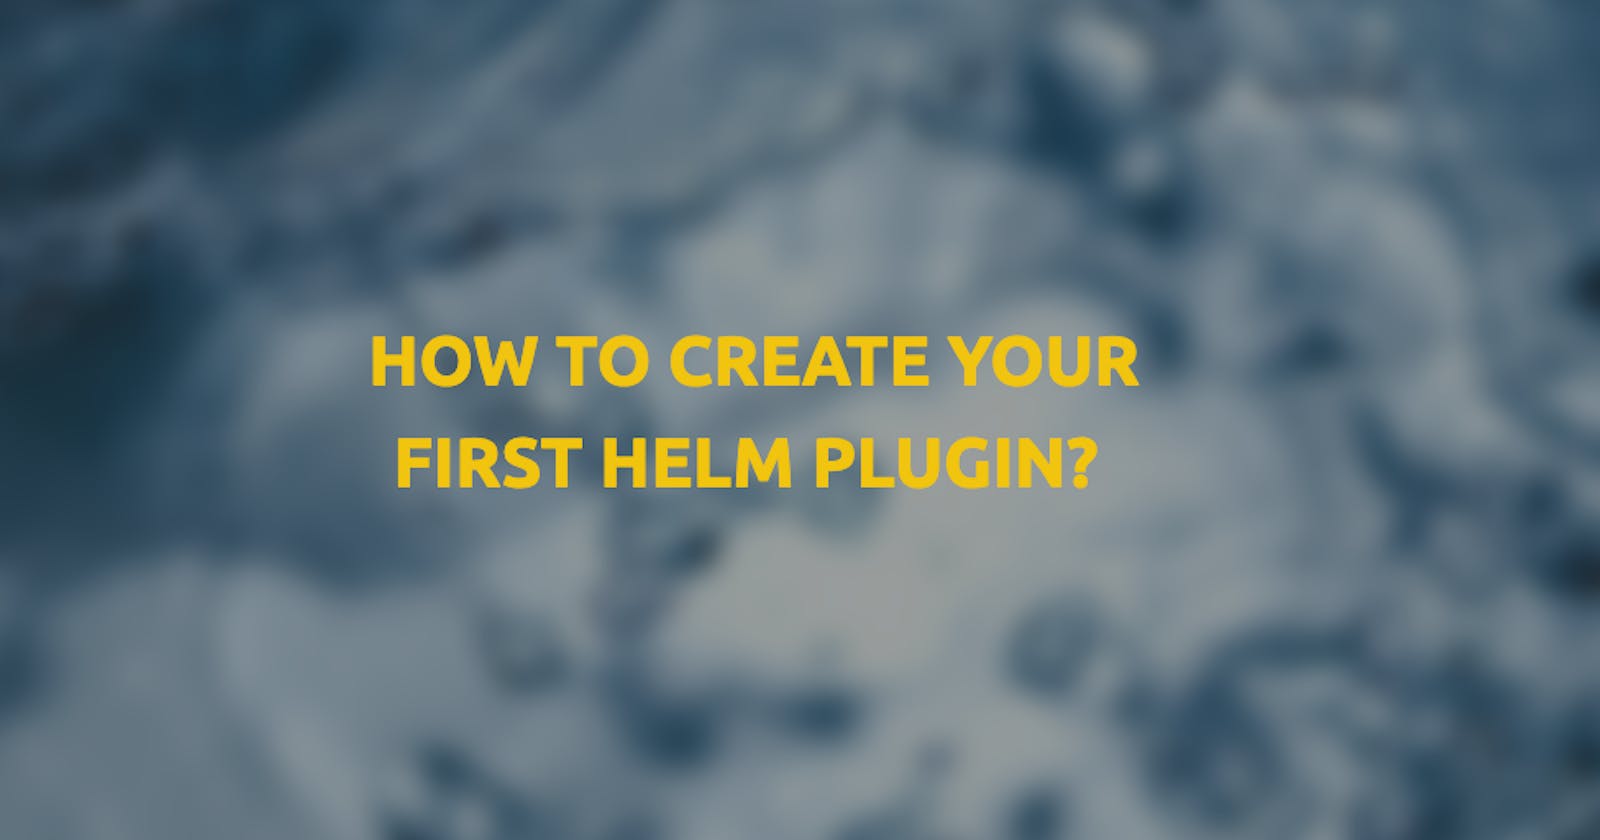 How to create your first Helm plugin?